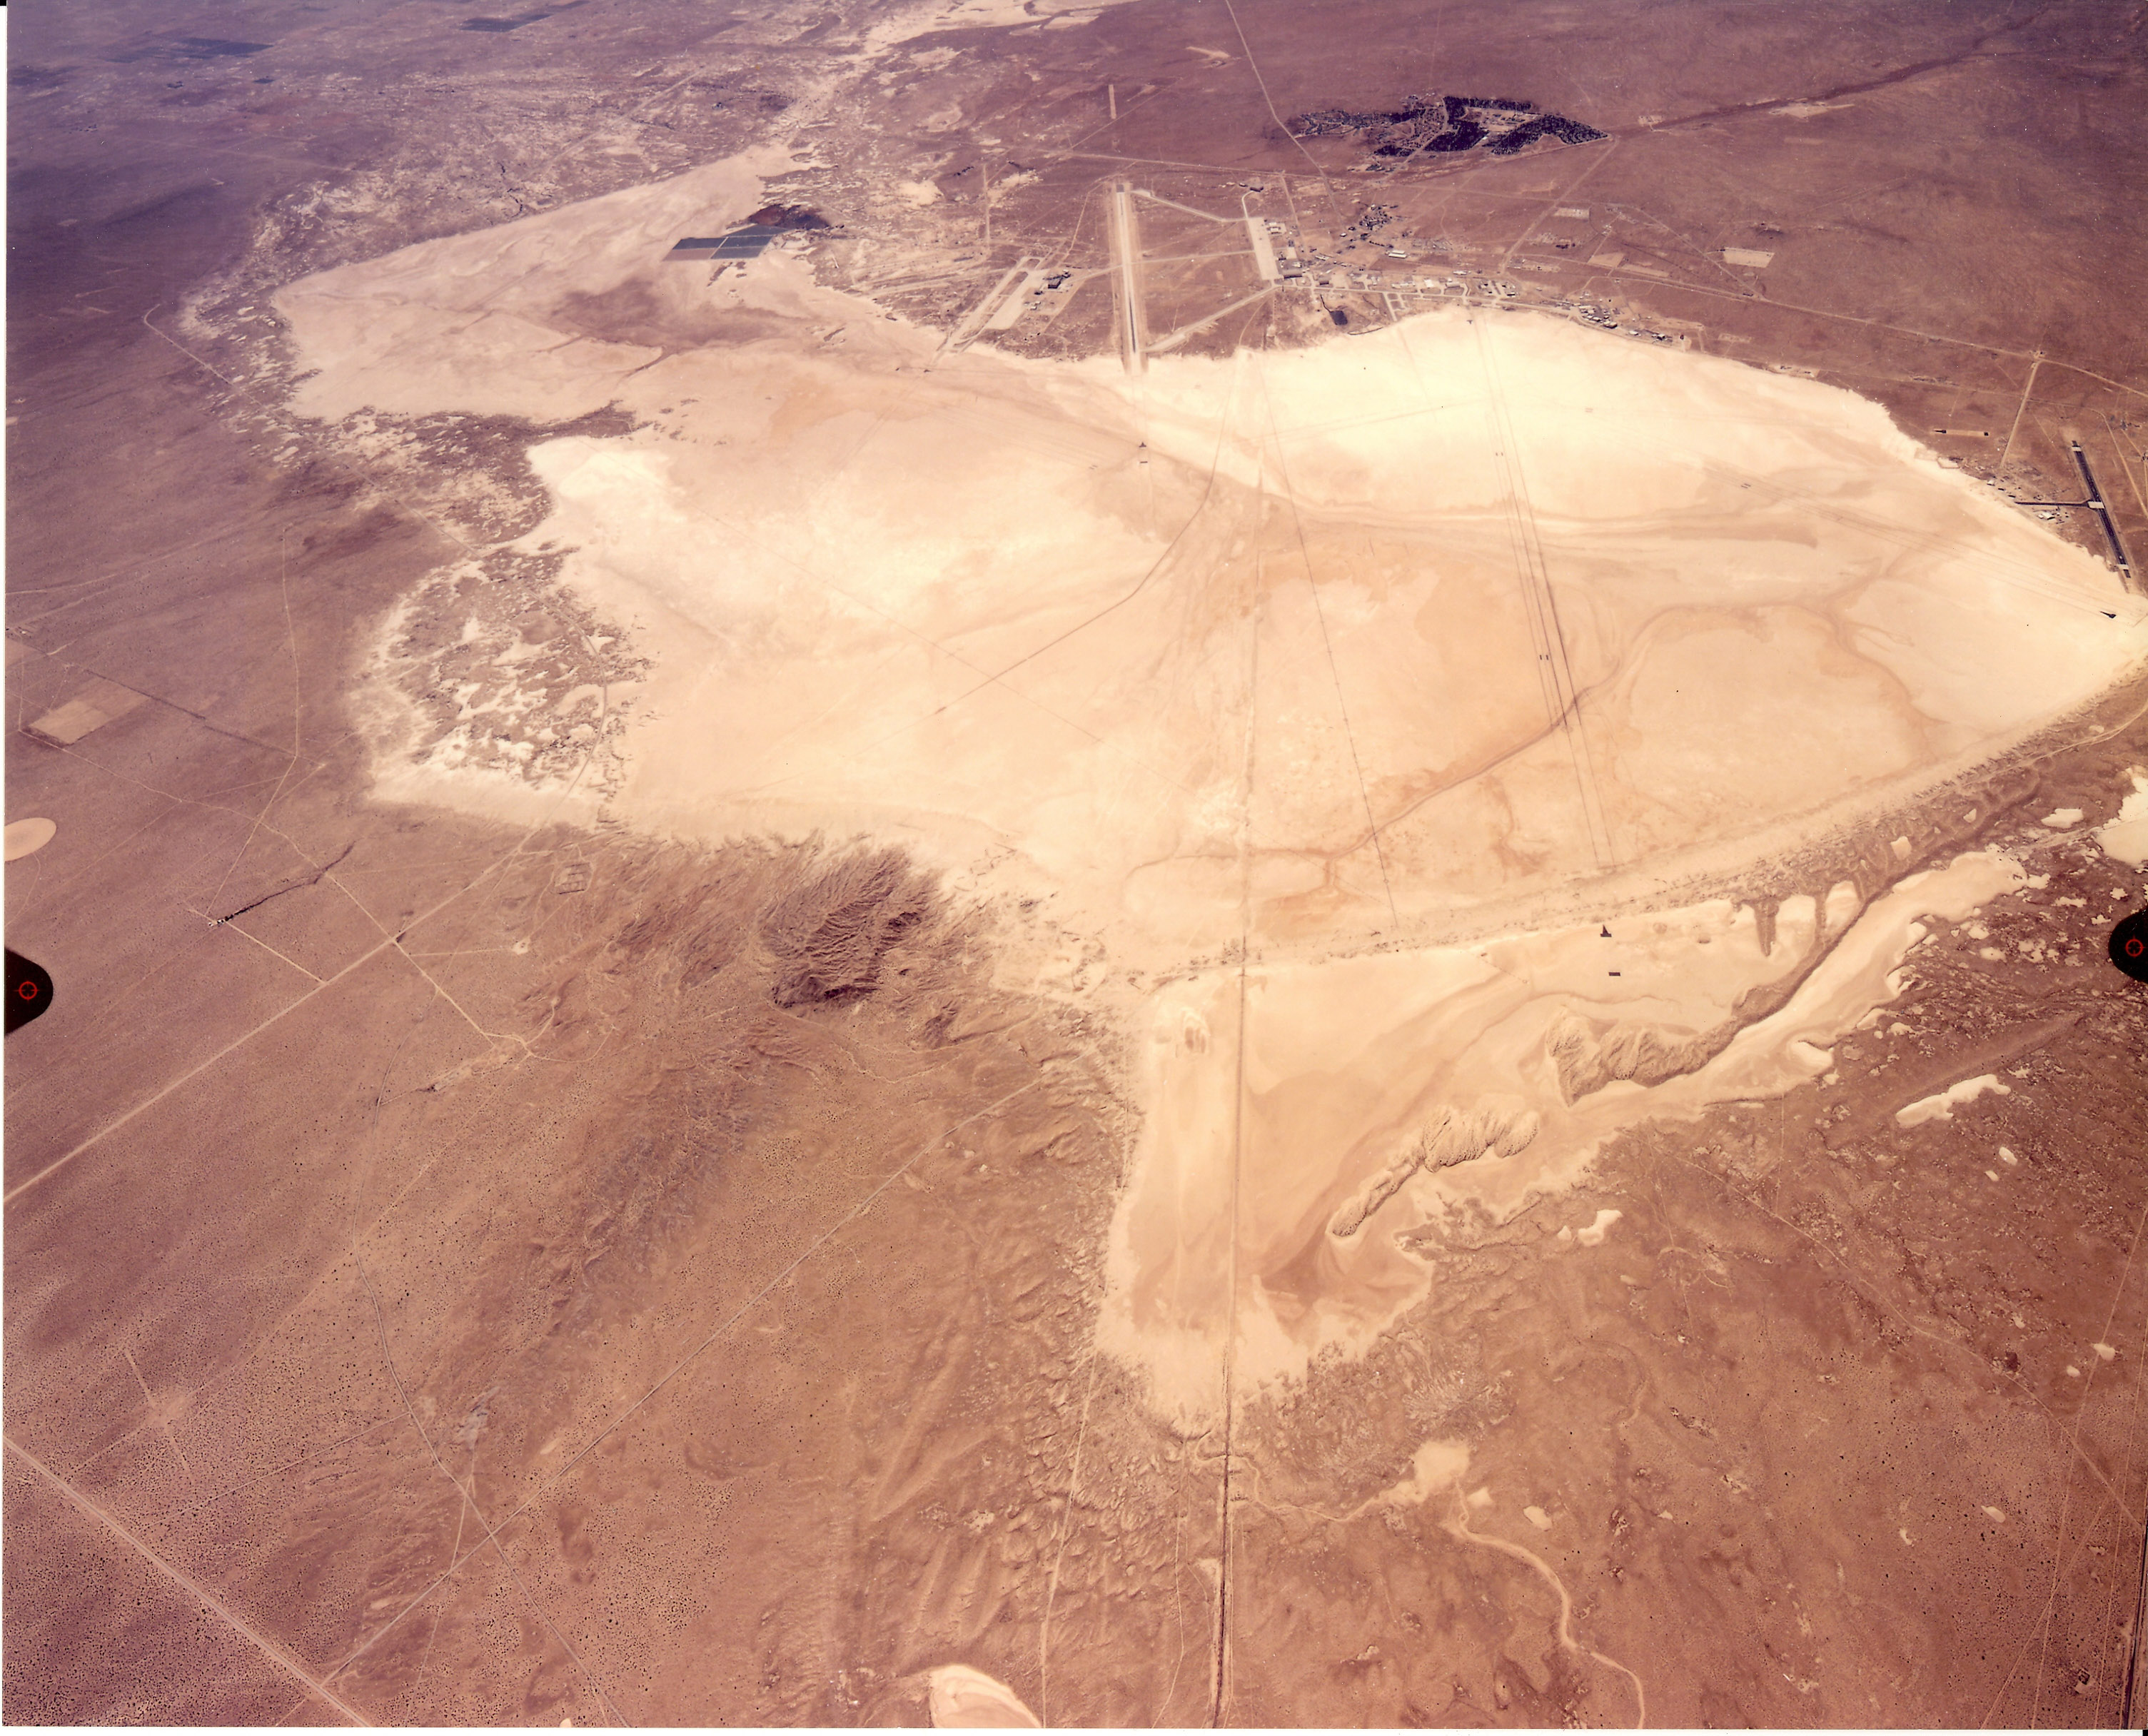 Rogers Dry Lake and Edwards Air Force Base, looking south west. Captain Yule landed his B-52 Stratofortress on the dry lake bed. (U.S. Air Force)